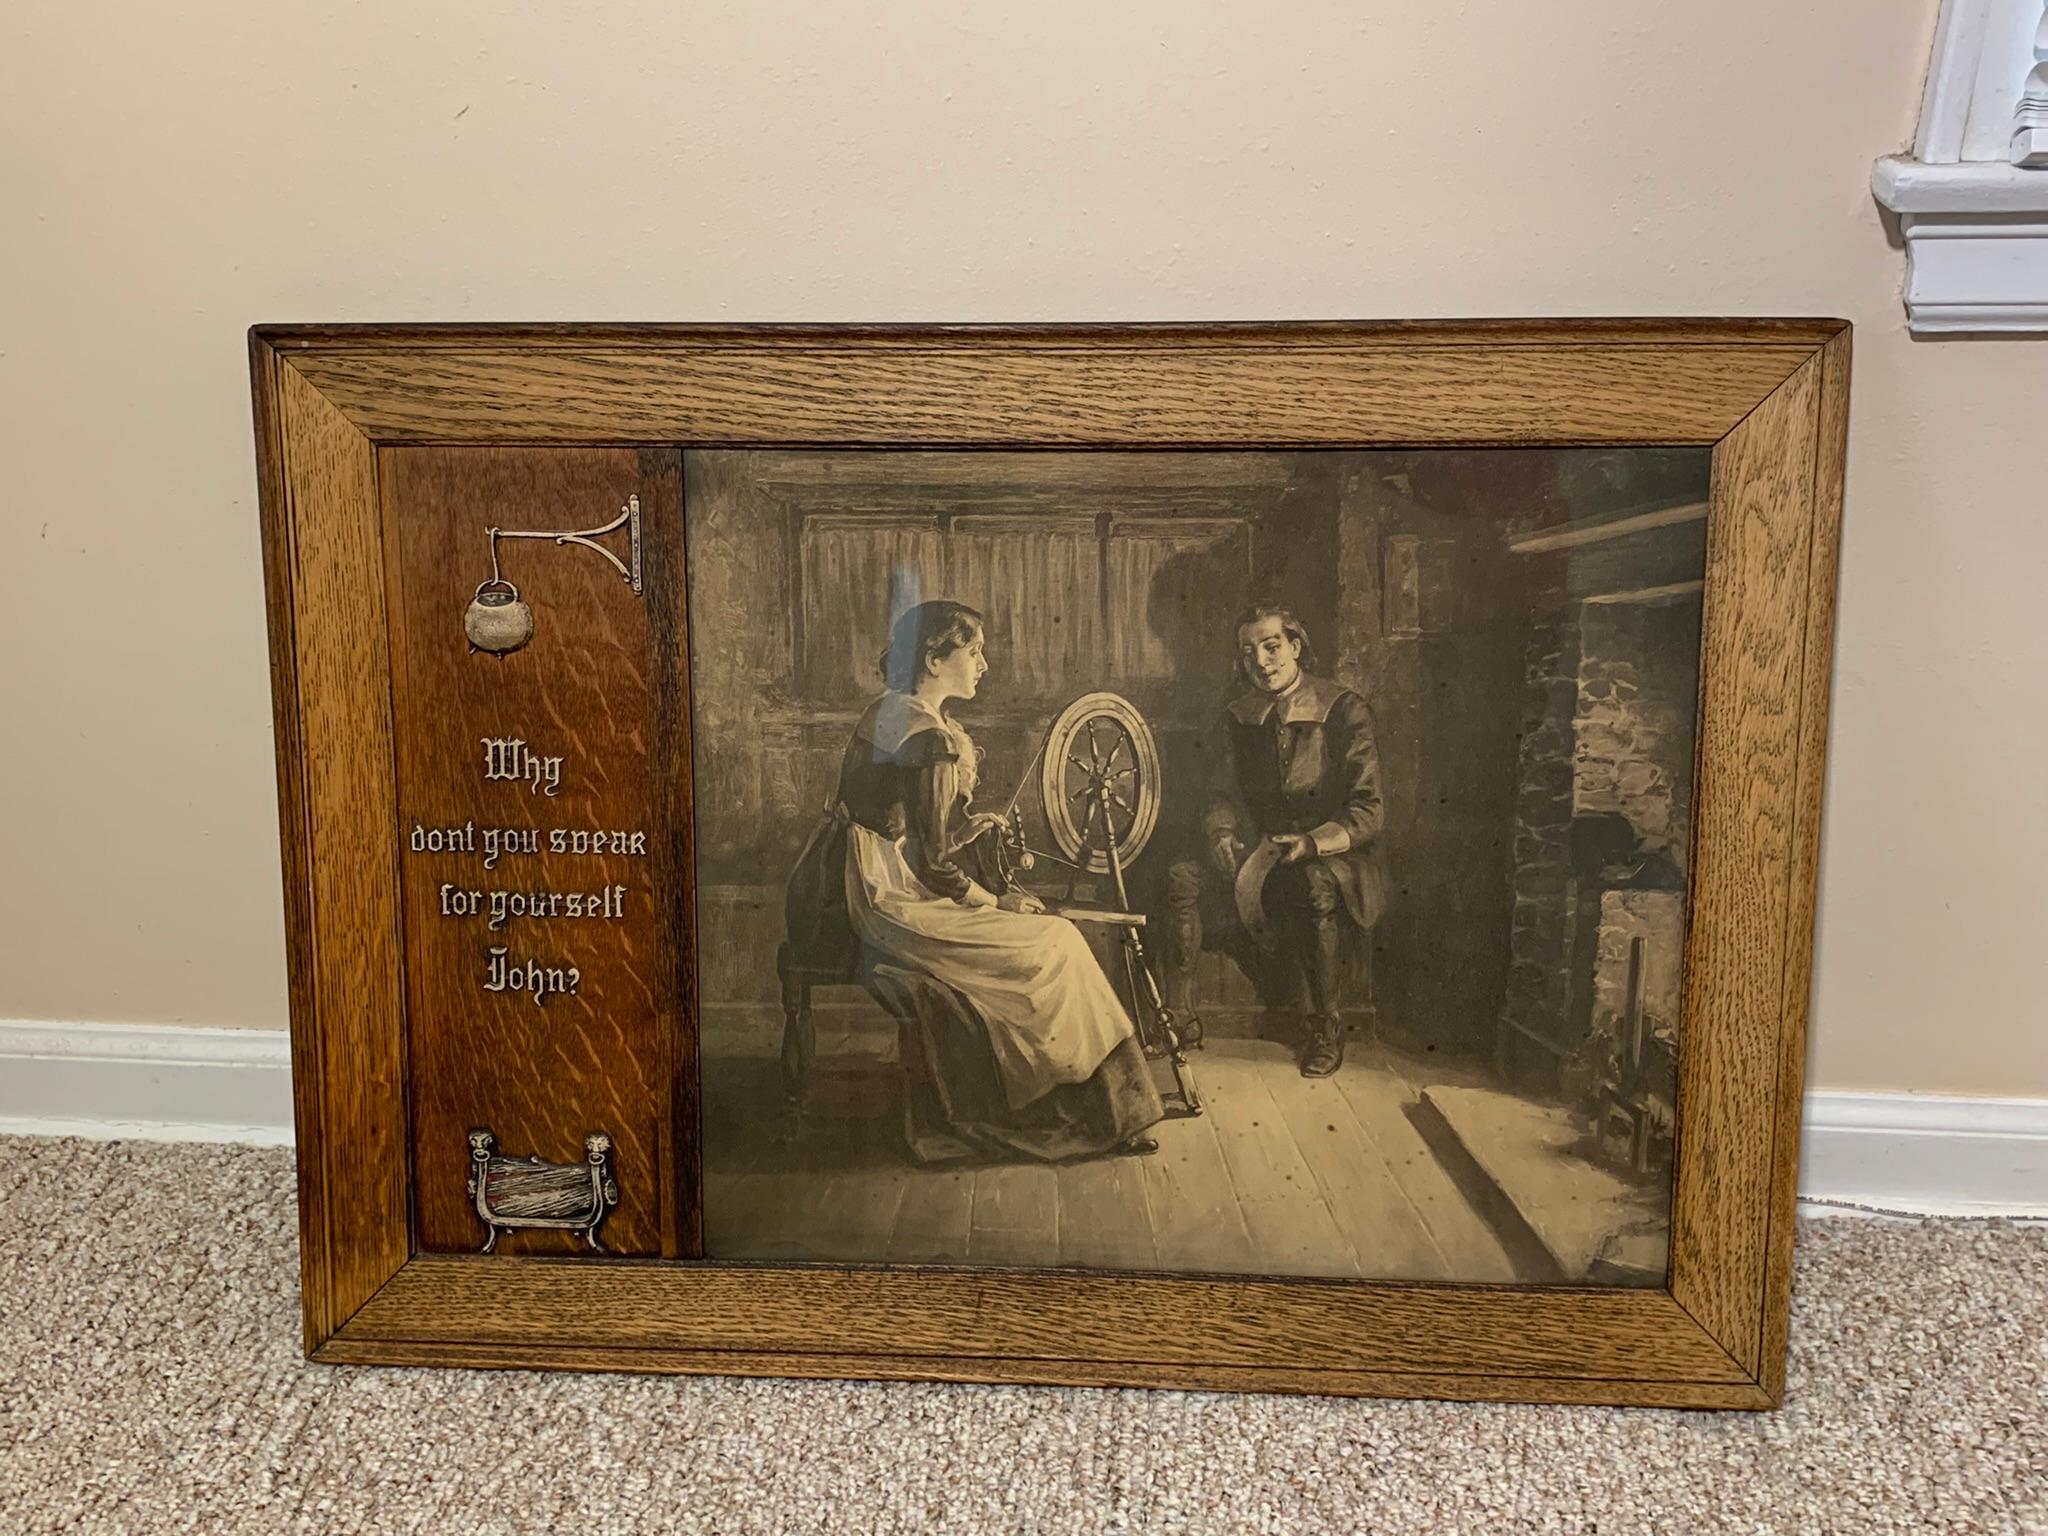 Corner Curio Cabinet, Doll, Framed Prints, The Courtship of Miles Standish